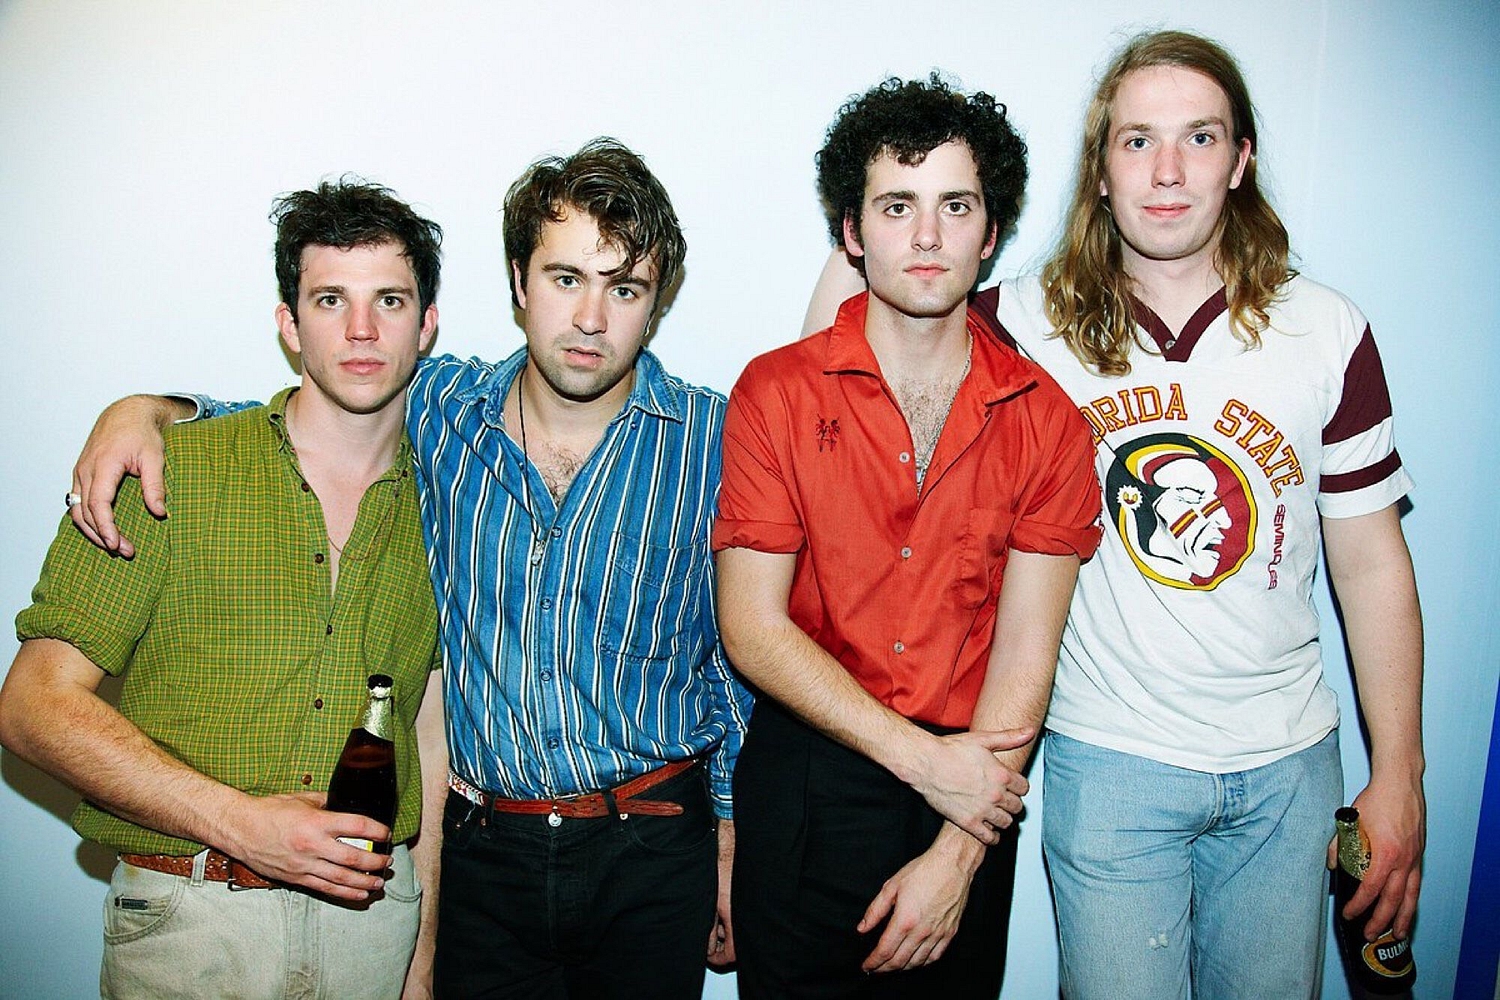 Hall Of Fame: ‘What Did You Expect From The Vaccines?’